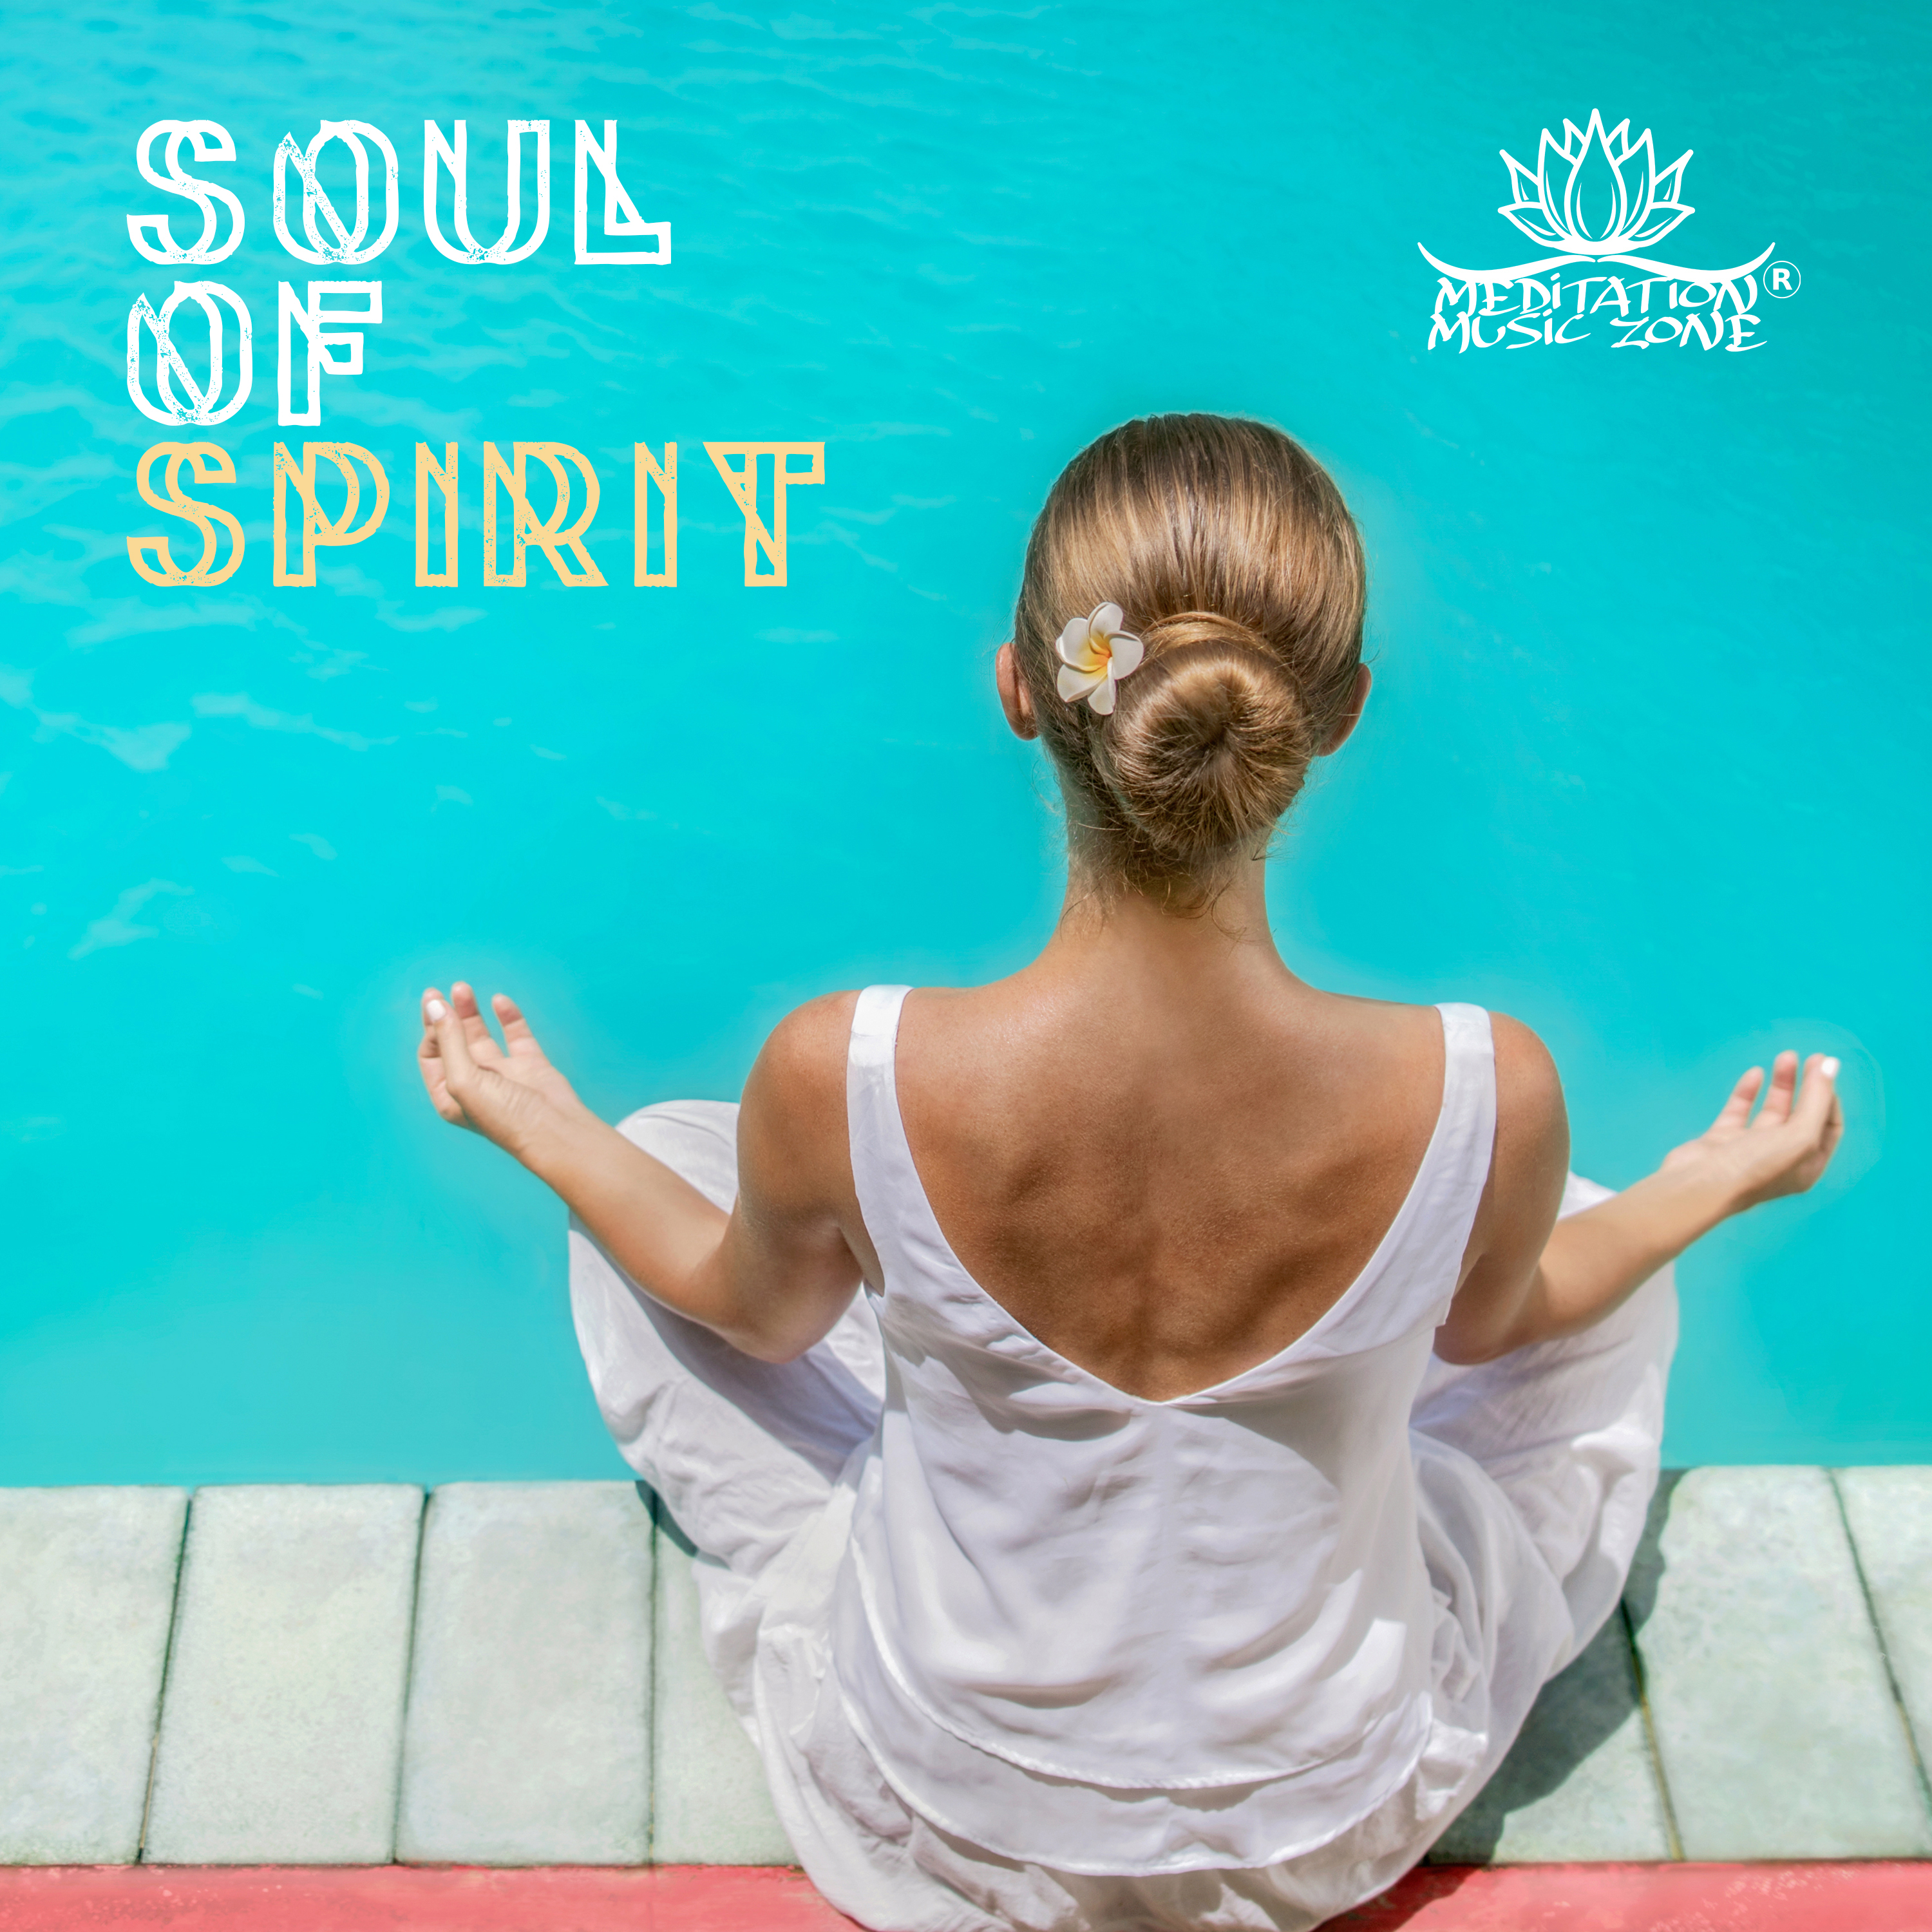 Soul of Spirit - Yoga is a Way of Life, Wonderful Silence, Rest in Peace, Deep Meditation